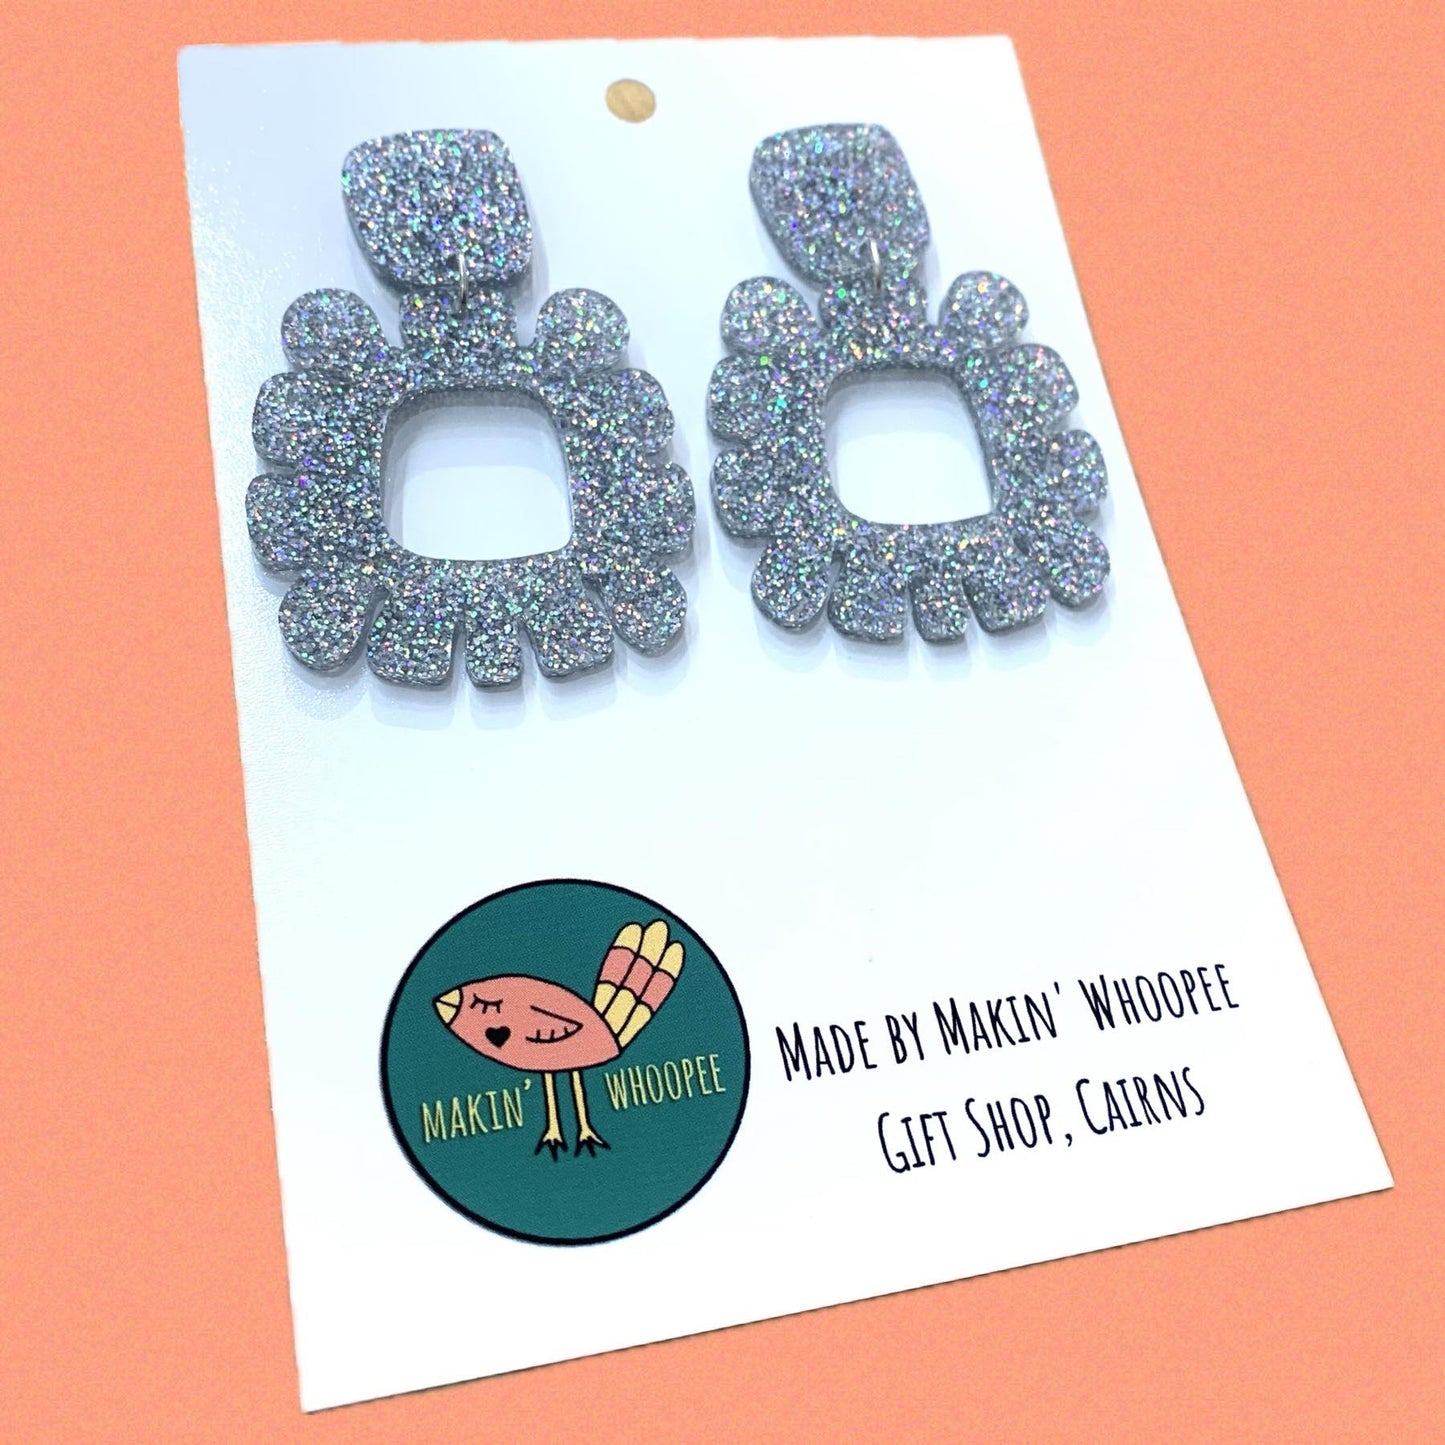 MAKIN' WHOOPEE - "Funky Flowers" - Statement Dangles - Silver Holographic Disco Dust